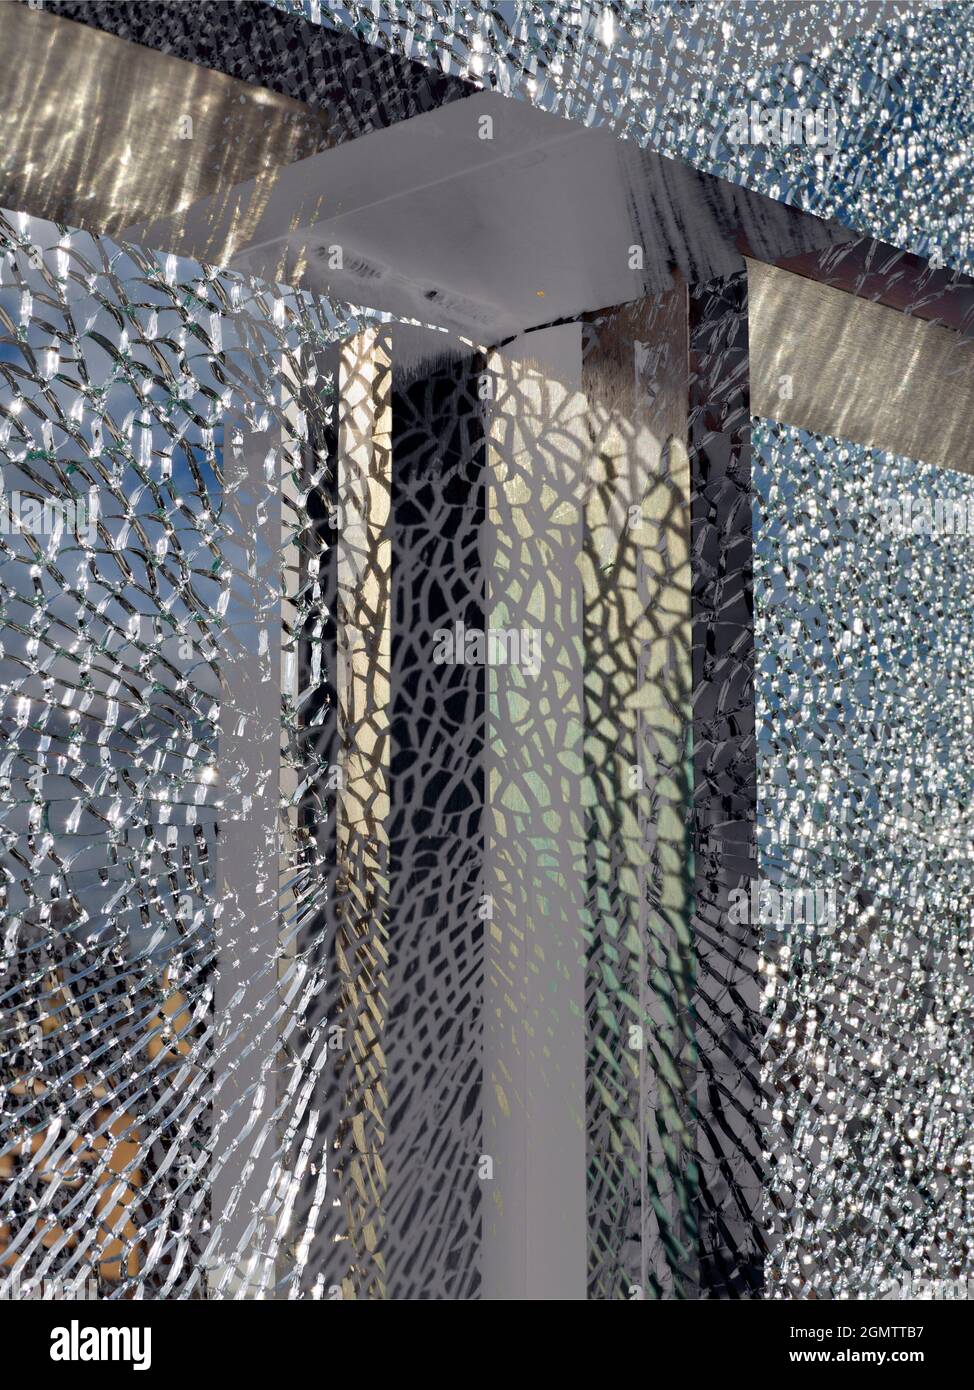 Oxford, England - 8 November 2017 A vandalised glass panel at a bus stop is a surprisingly beautiful thing, with striking abstract patterning. Stock Photo